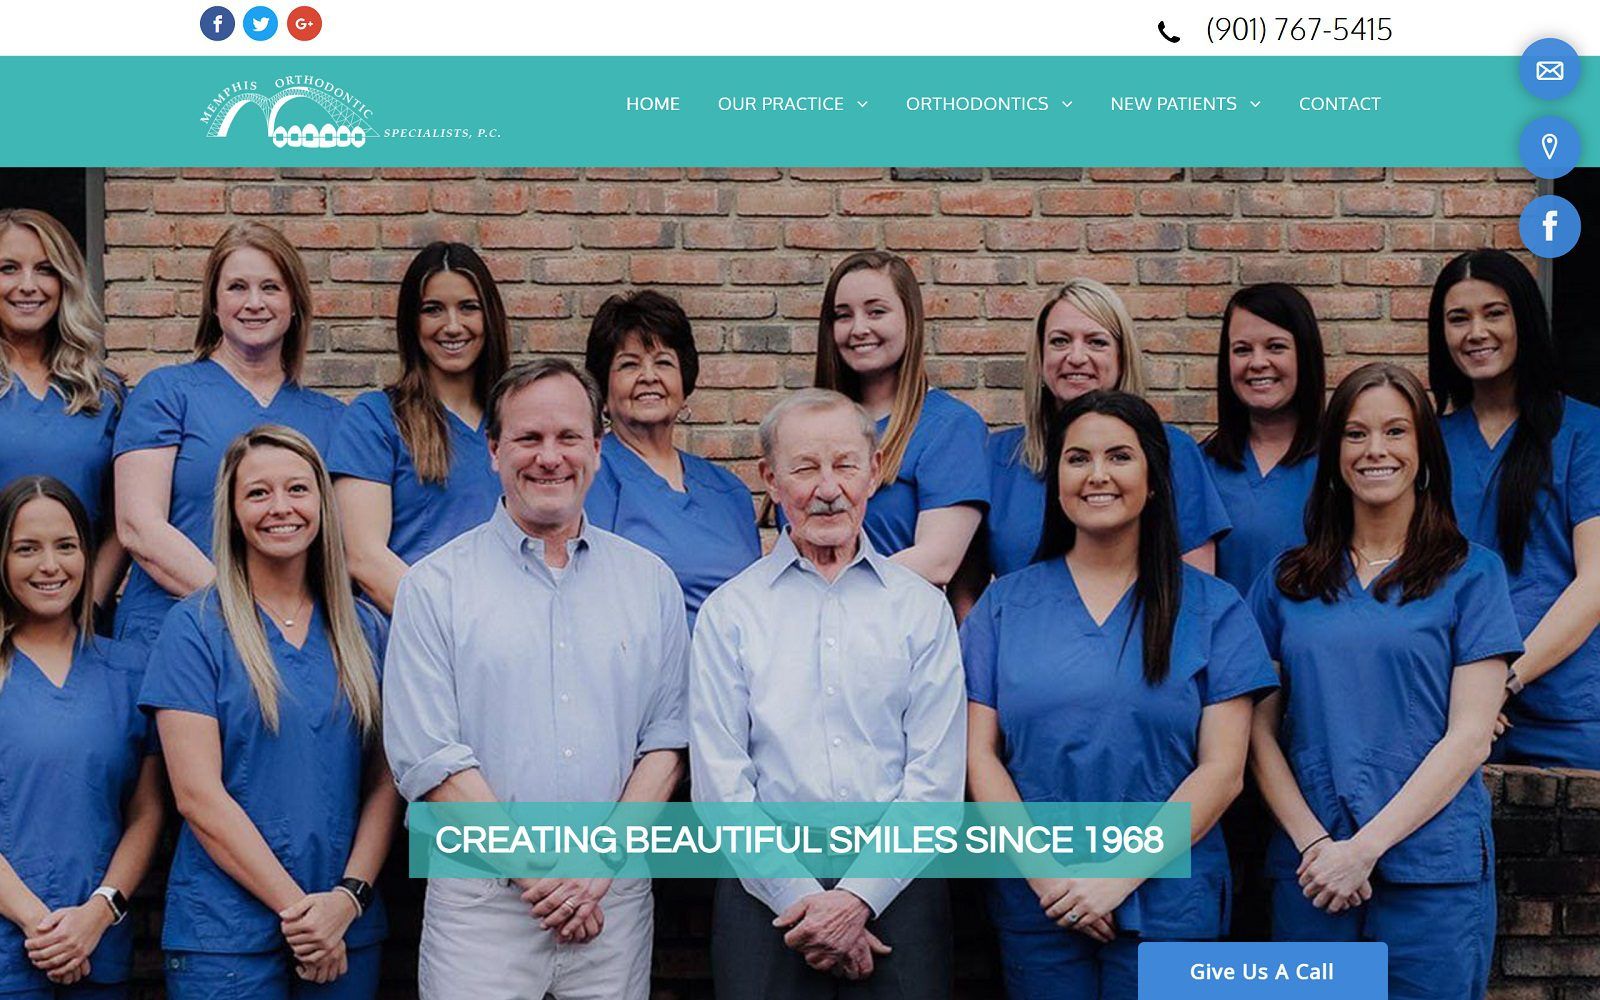 The screenshot of memphis orthodontic specialists: stanley and scott werner website